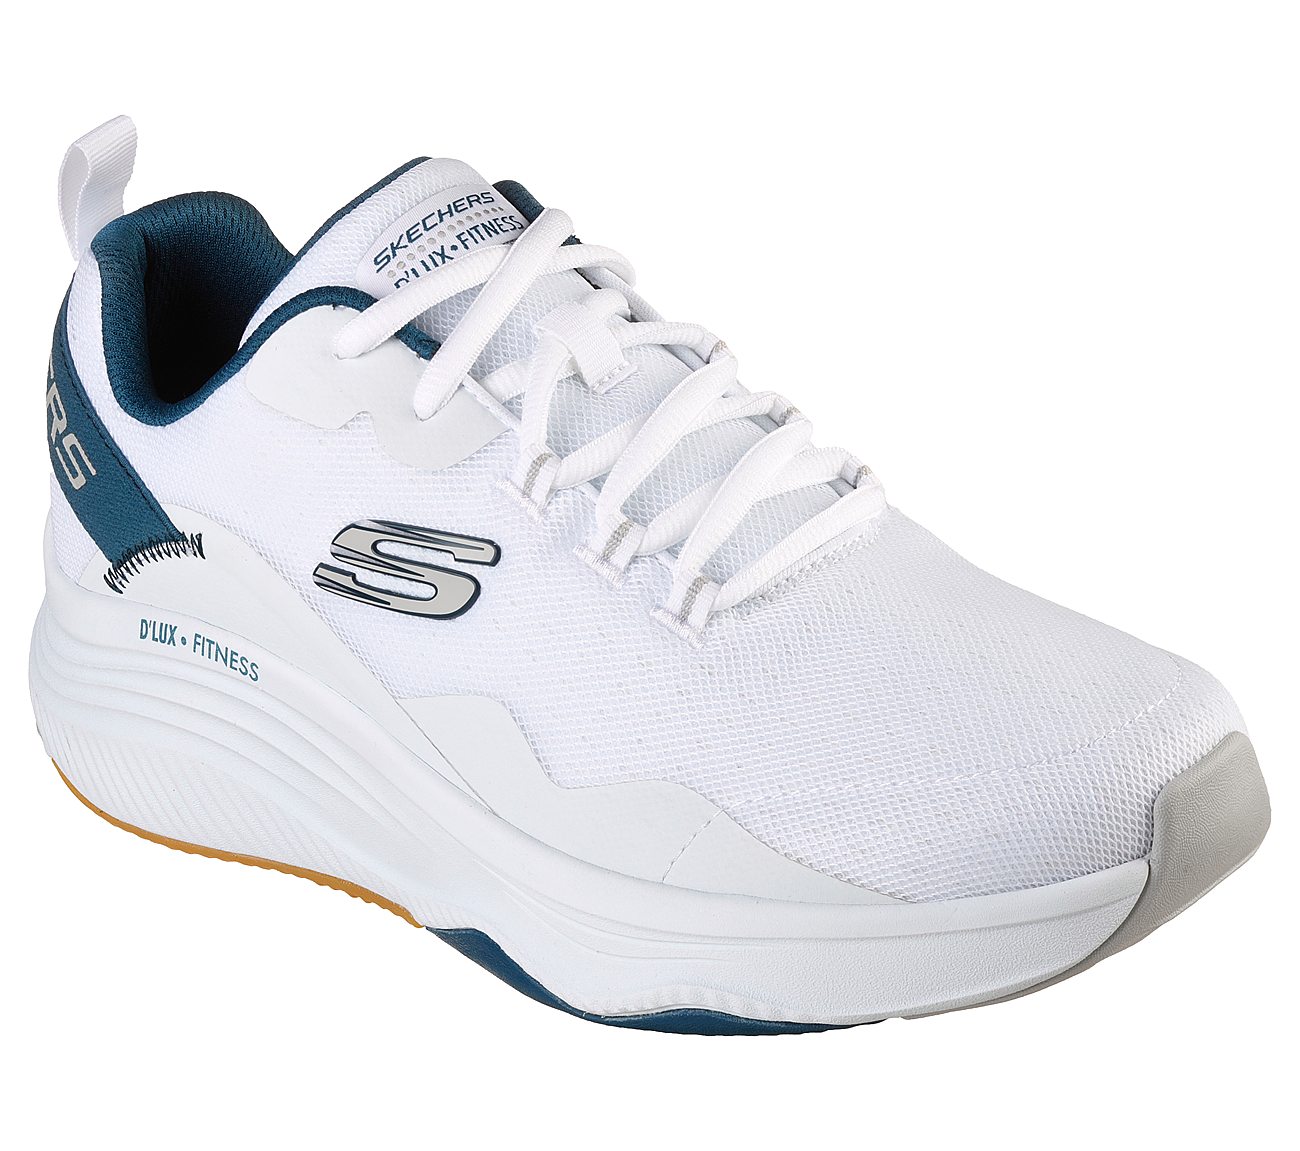 D'LUX FITNESS - ROAM FREE, WHITE/BLUE Footwear Right View